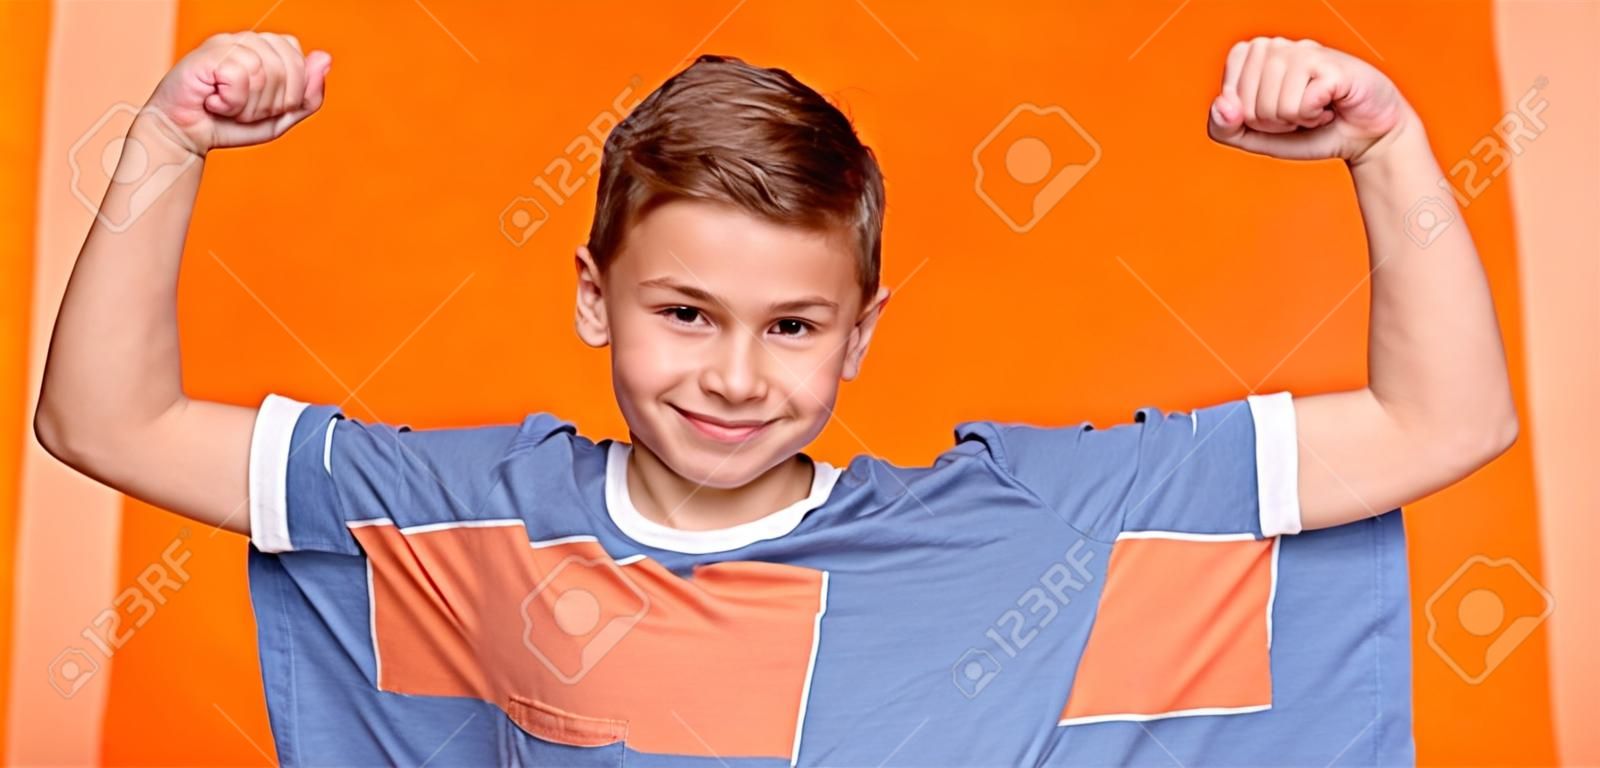 Strong little man. Smiling boy demonstrating his biceps and muscles, orange panorama background